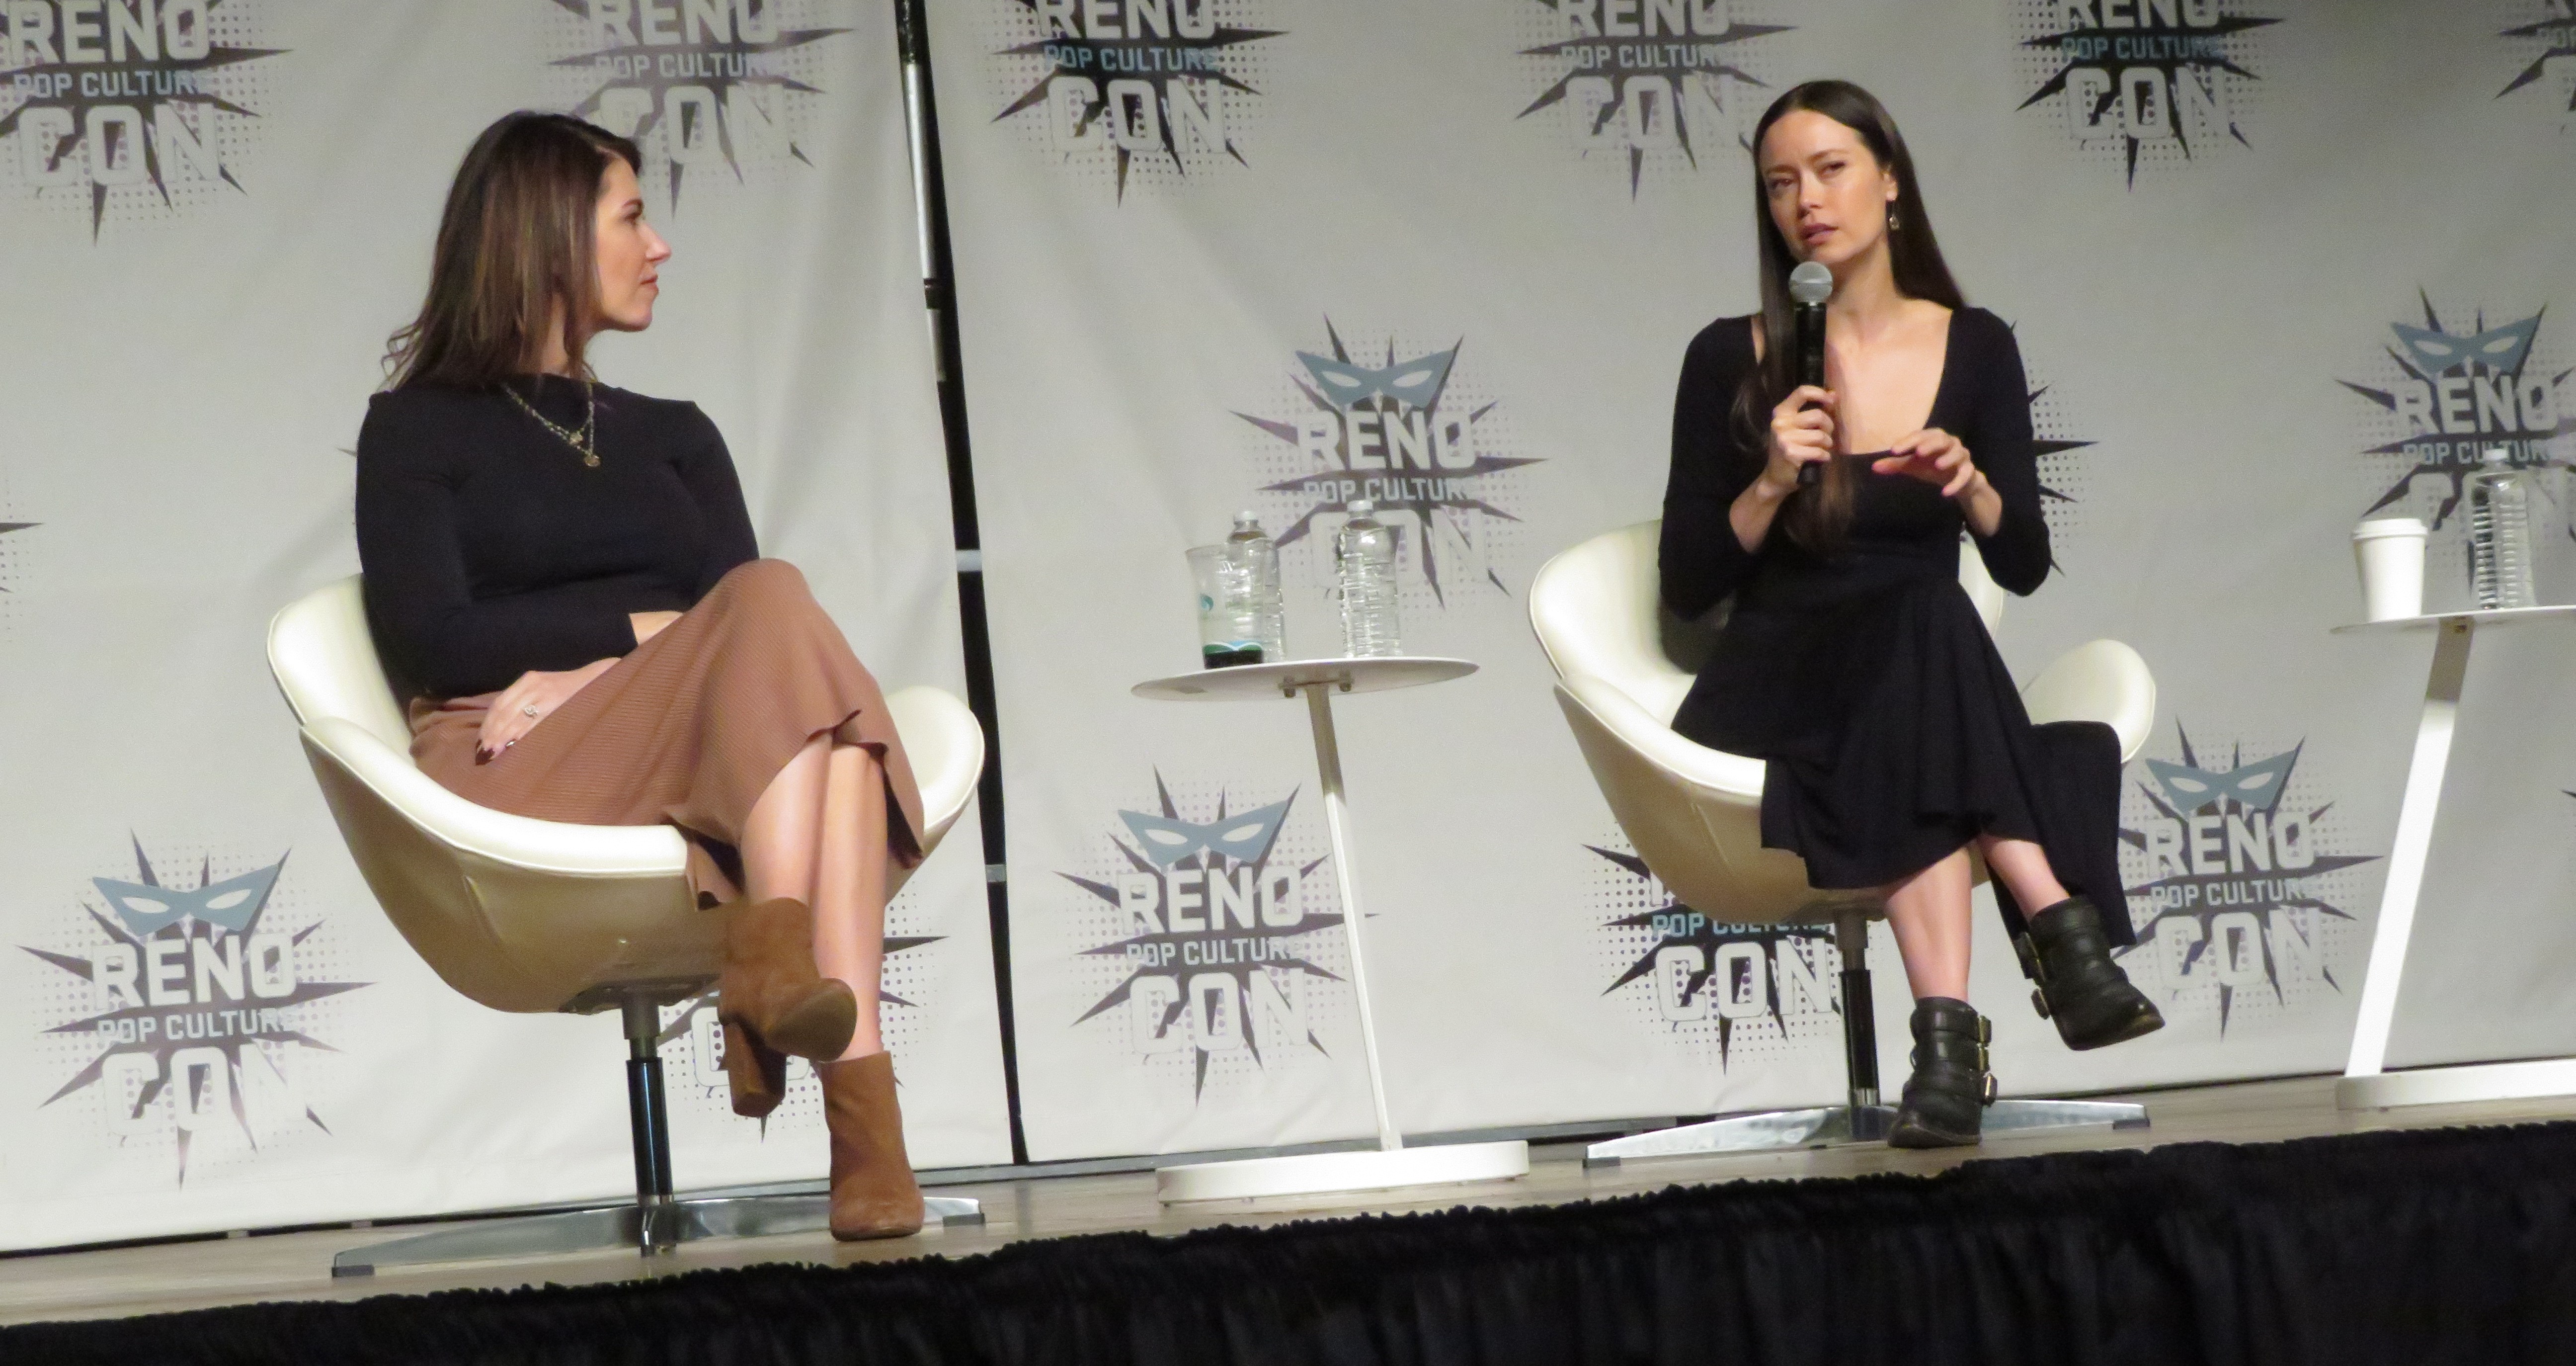 Summer Glau and Jewel Staite at Reno Pop Culture Con Panel Video